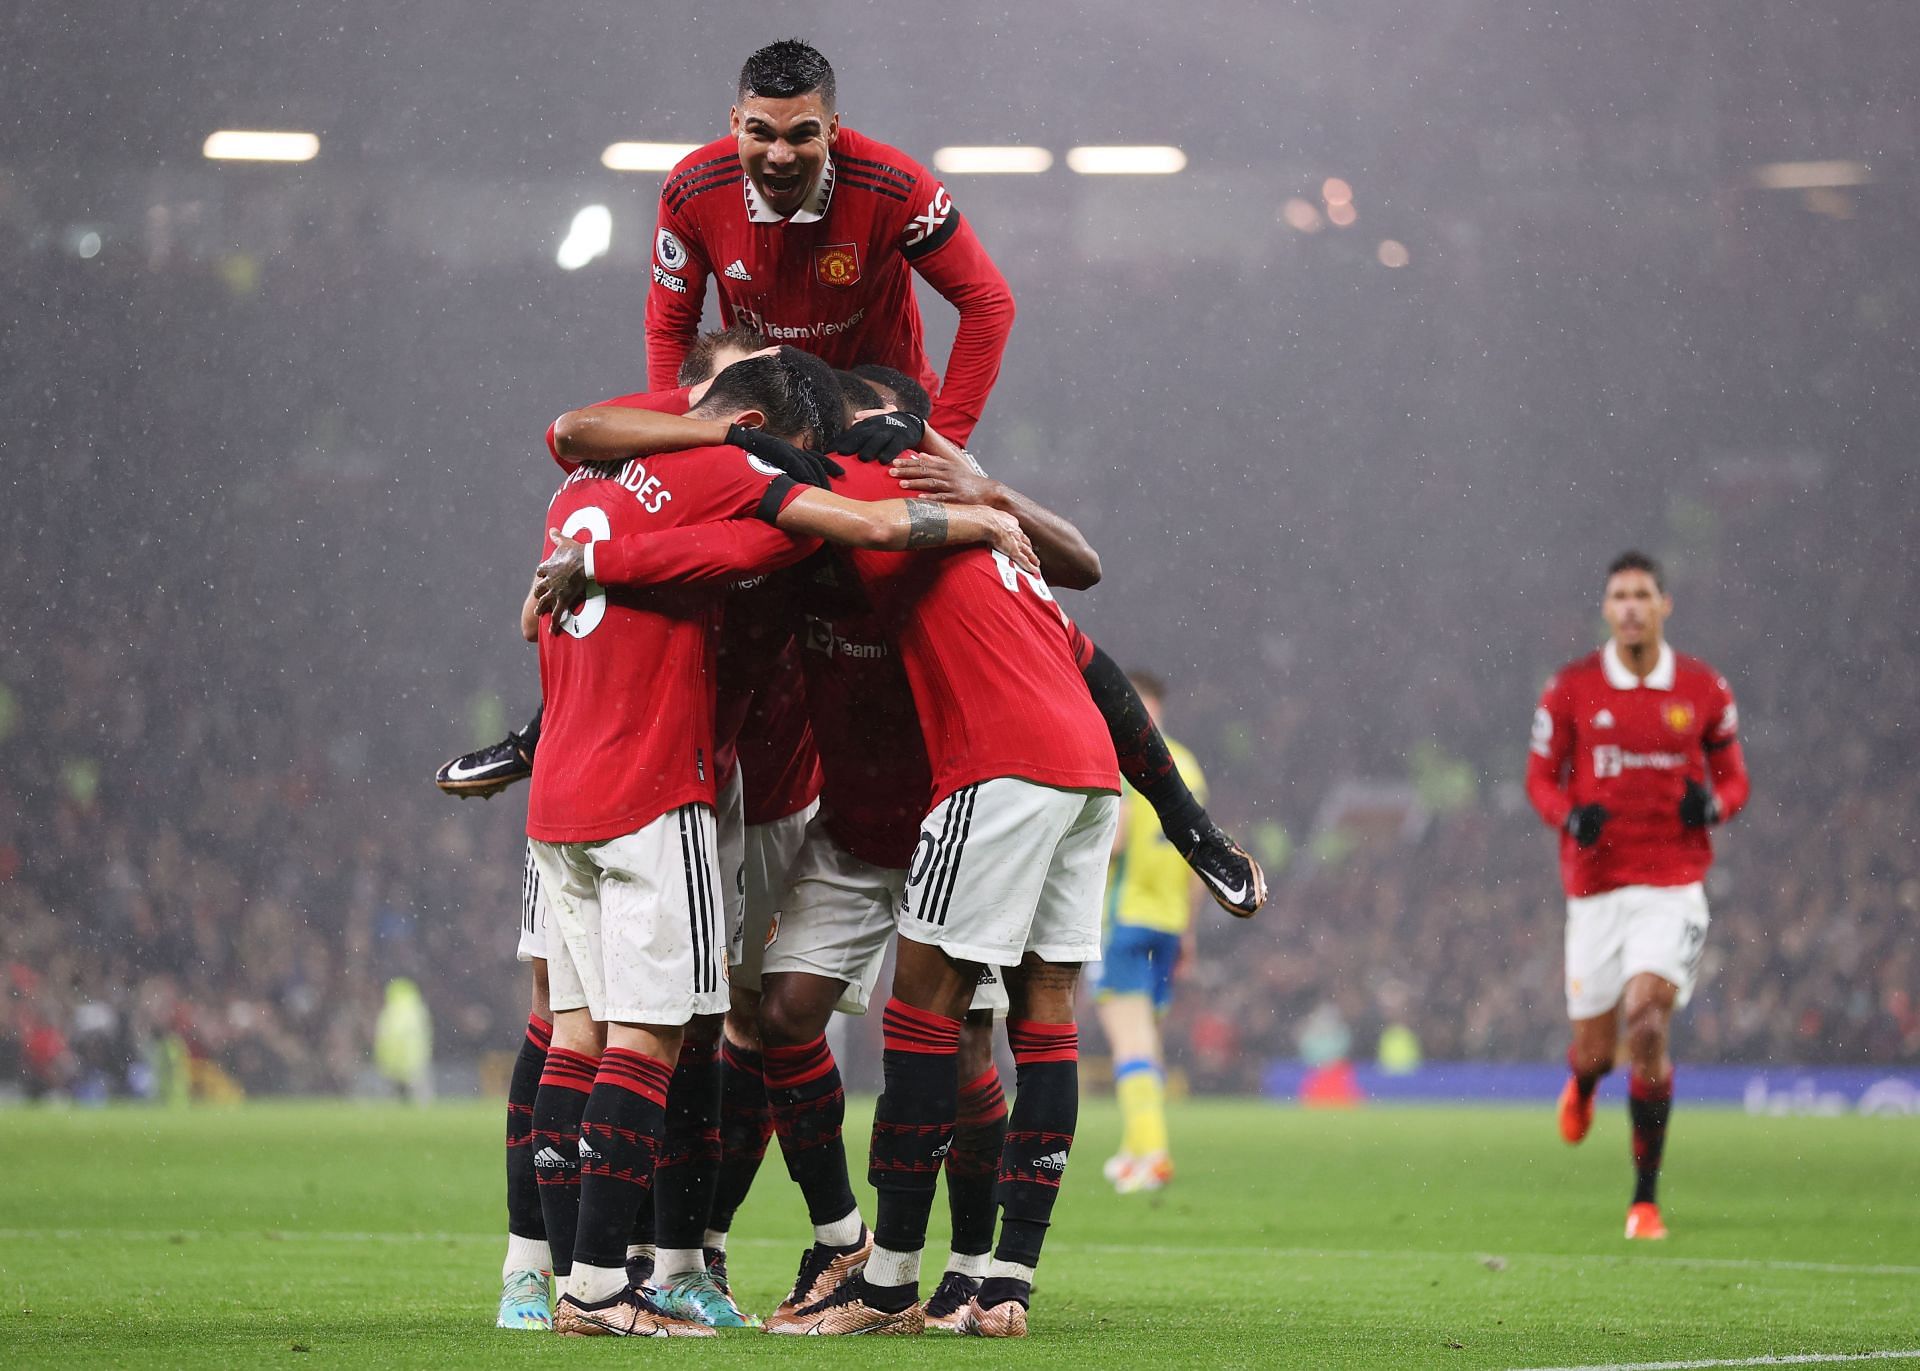 Man Utd name strong side for their encounter with Wolves.